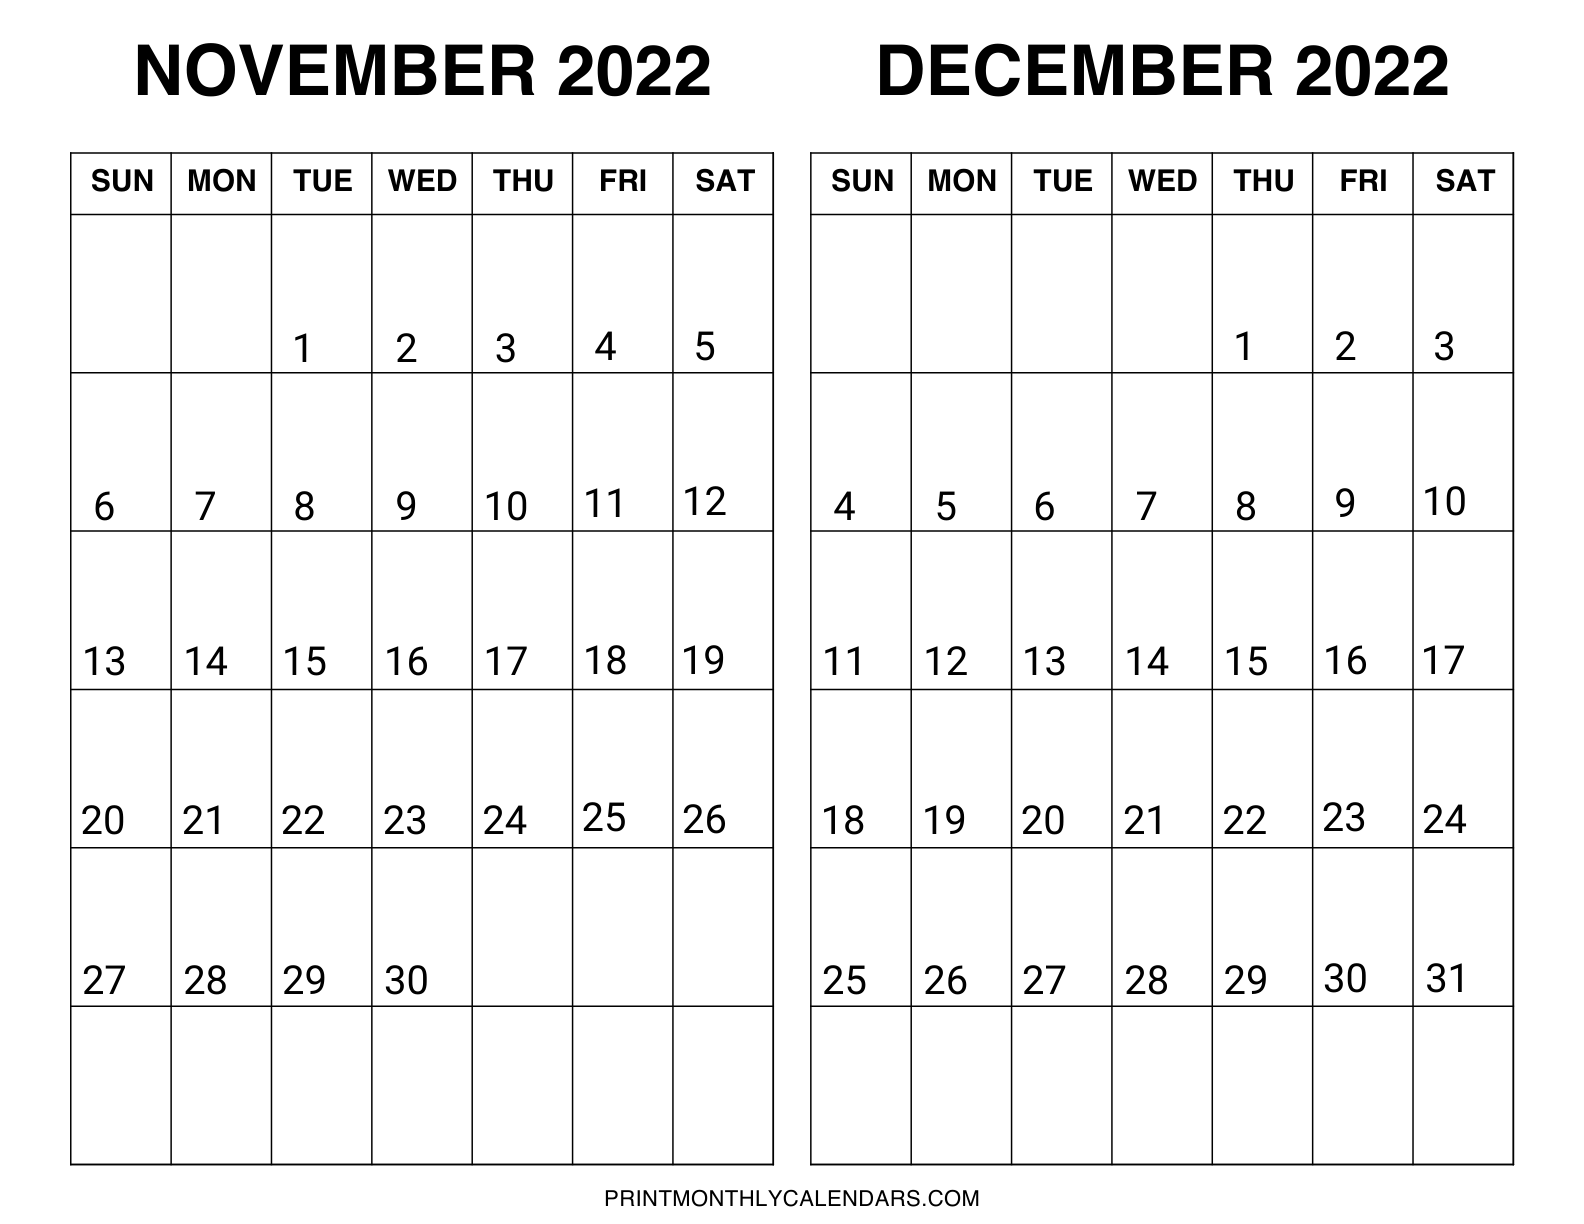 November and December 2022 calendar with weekdays starting from Sunday. Two month grids are arranged in landscape layout with bold monthly dates.